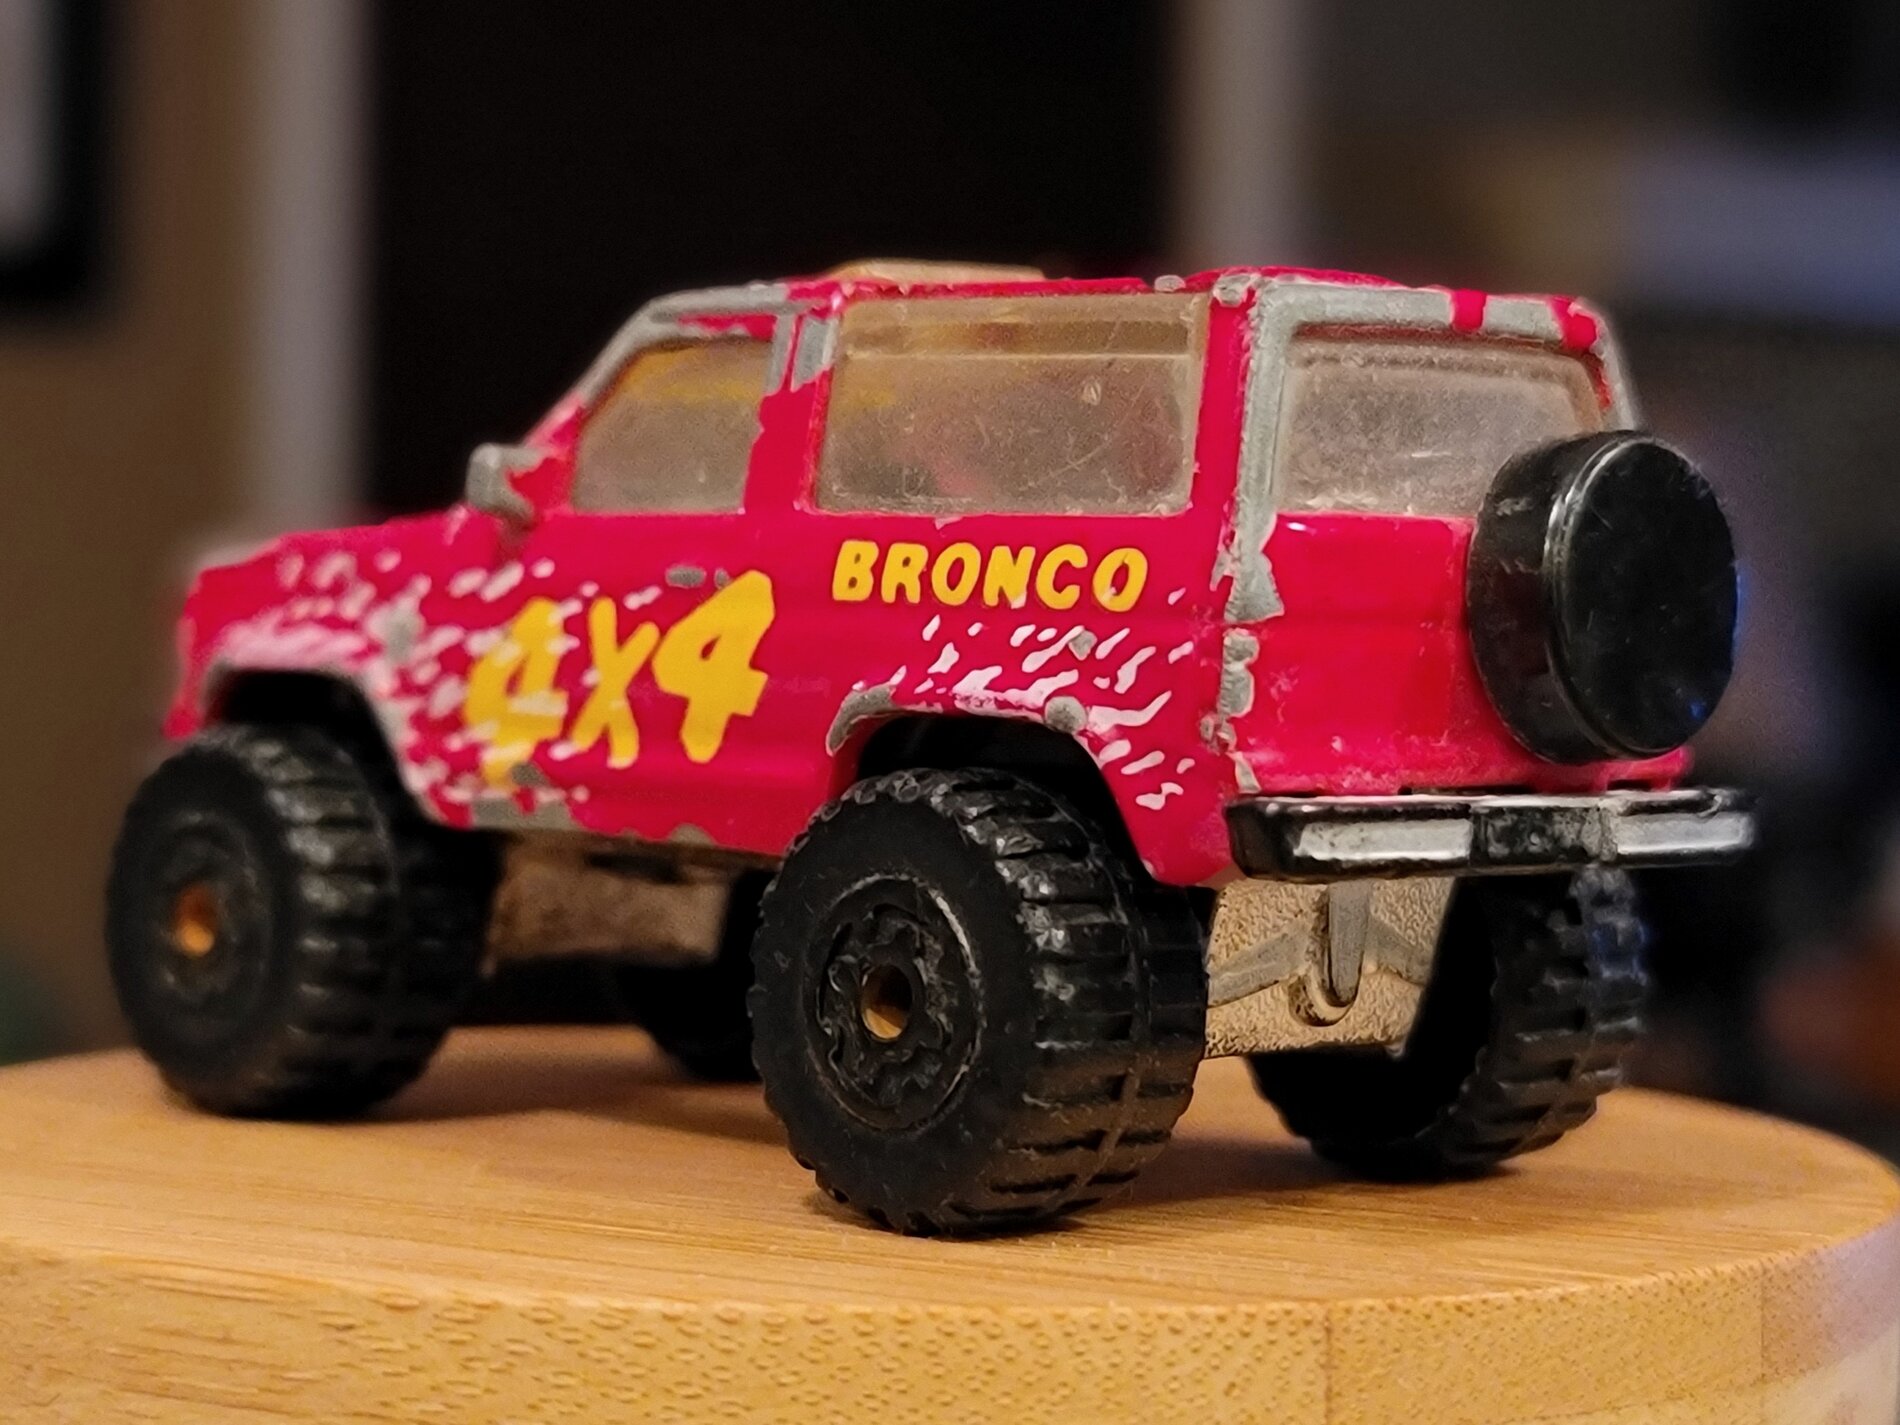 Ford Bronco Hot Wheels 2021 Bronco 2-Door THEY ARE HERE! 20210211_235030